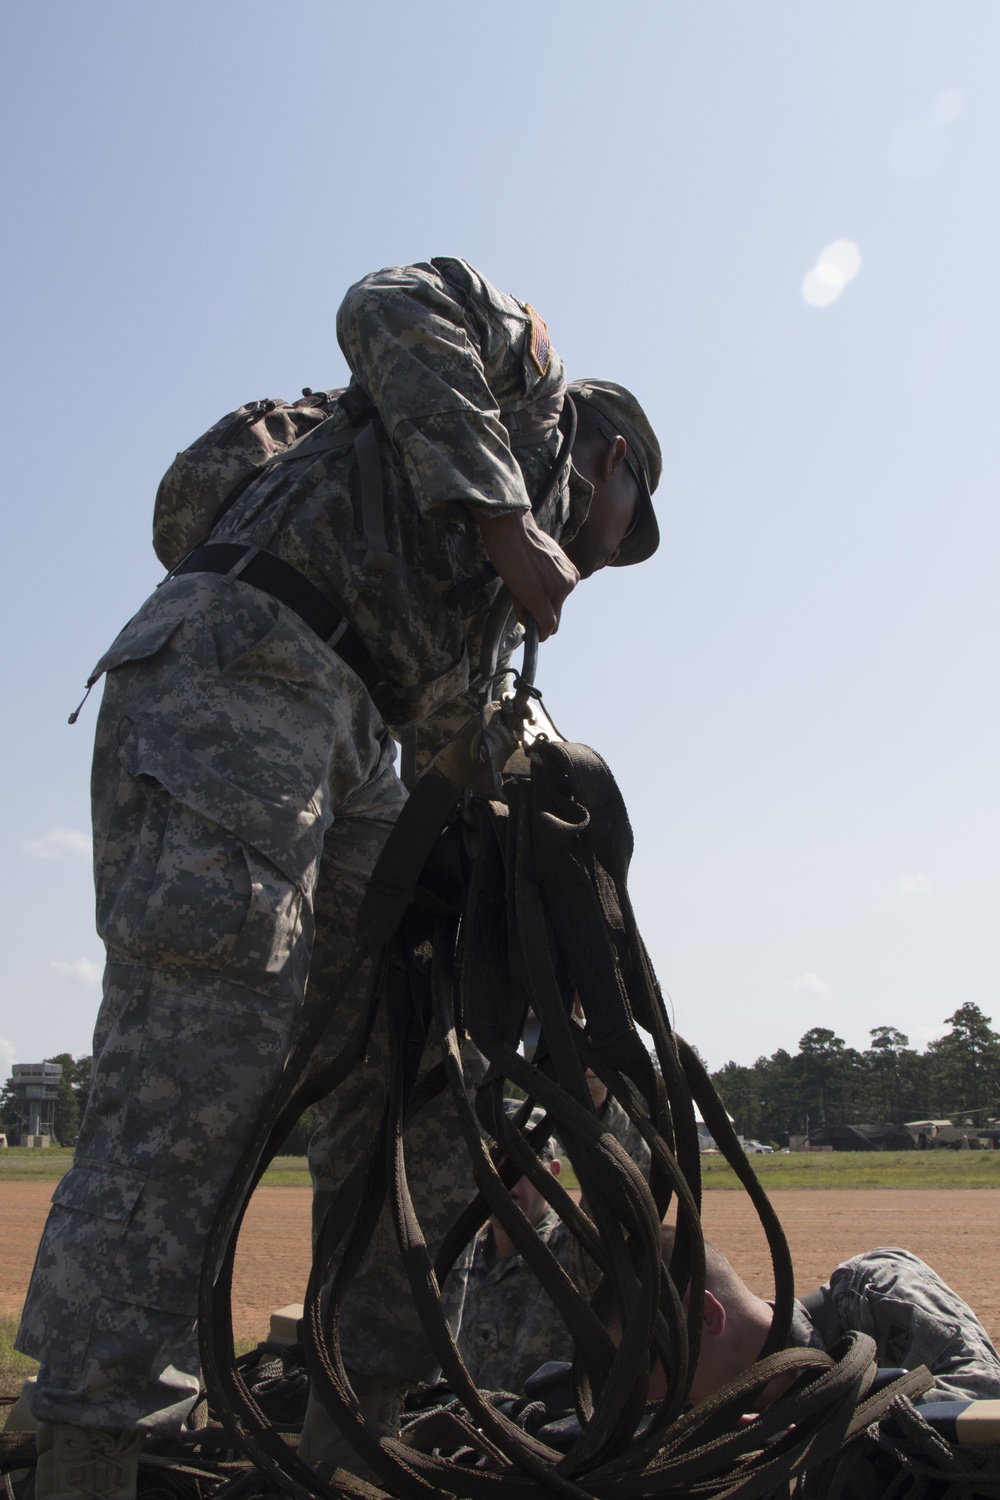 Troops sling load supplies to keep comrades in fight